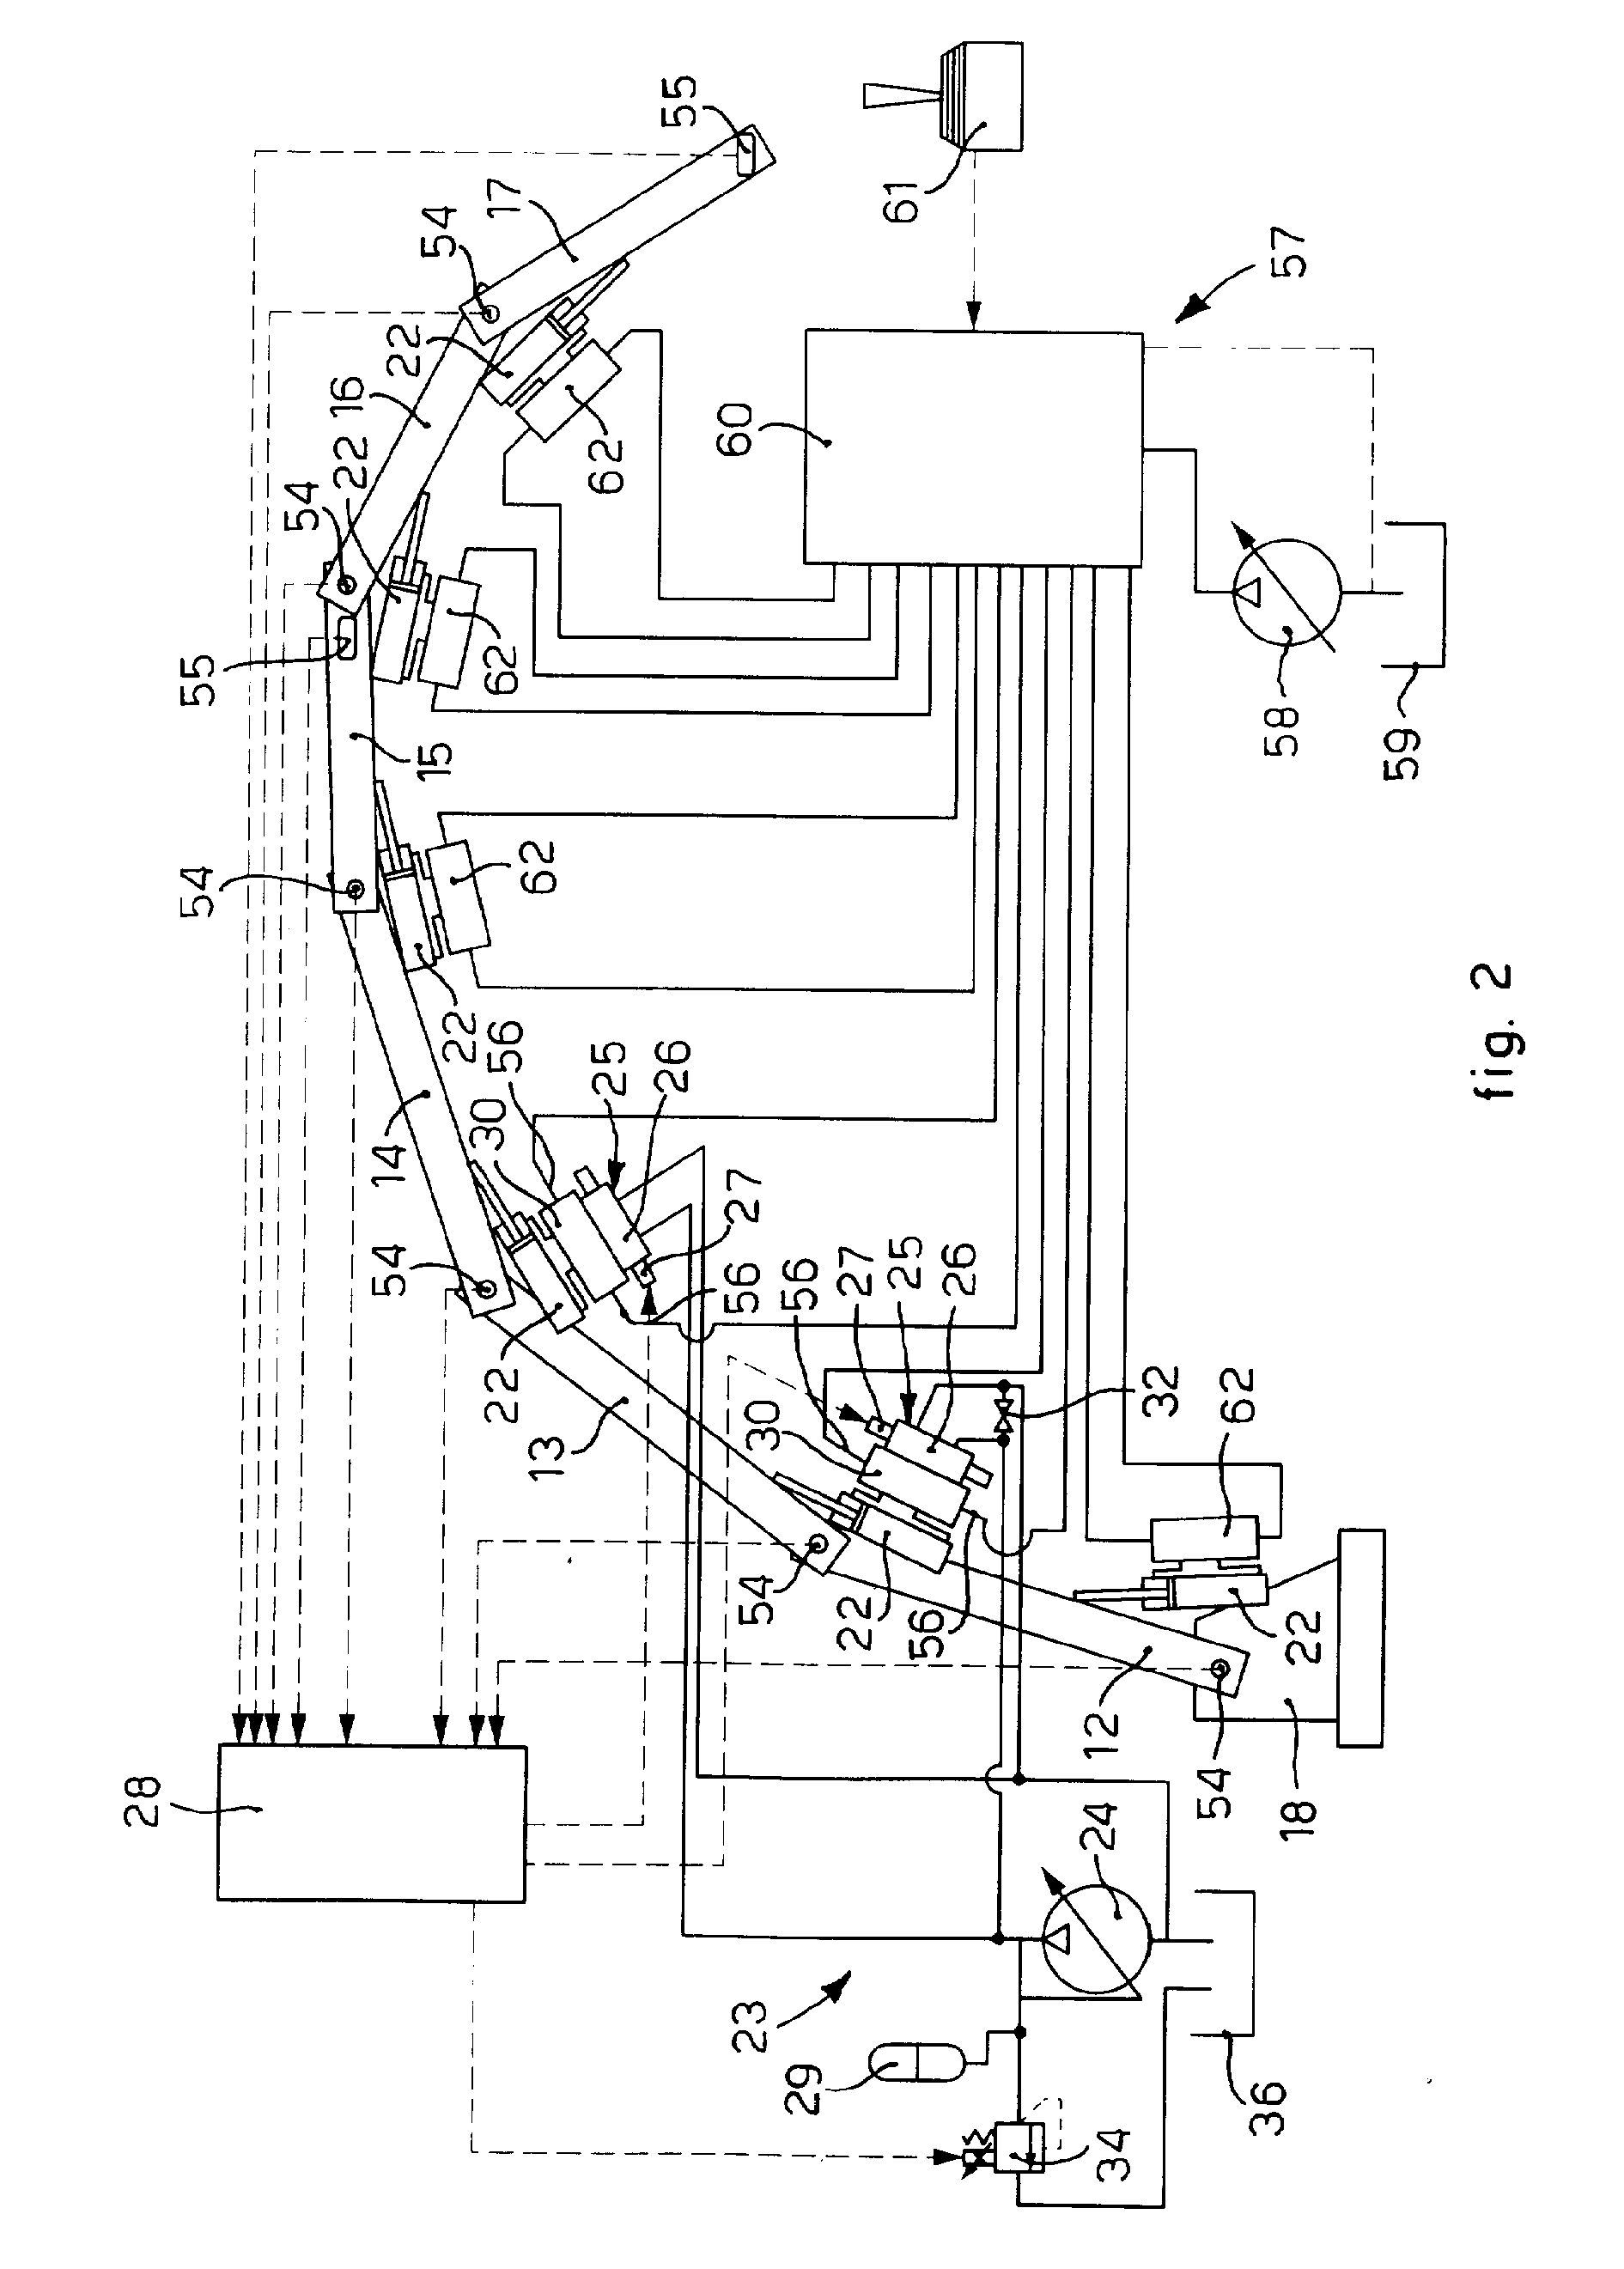 Device to actively control the vibrations of an articulated arm to pump concrete